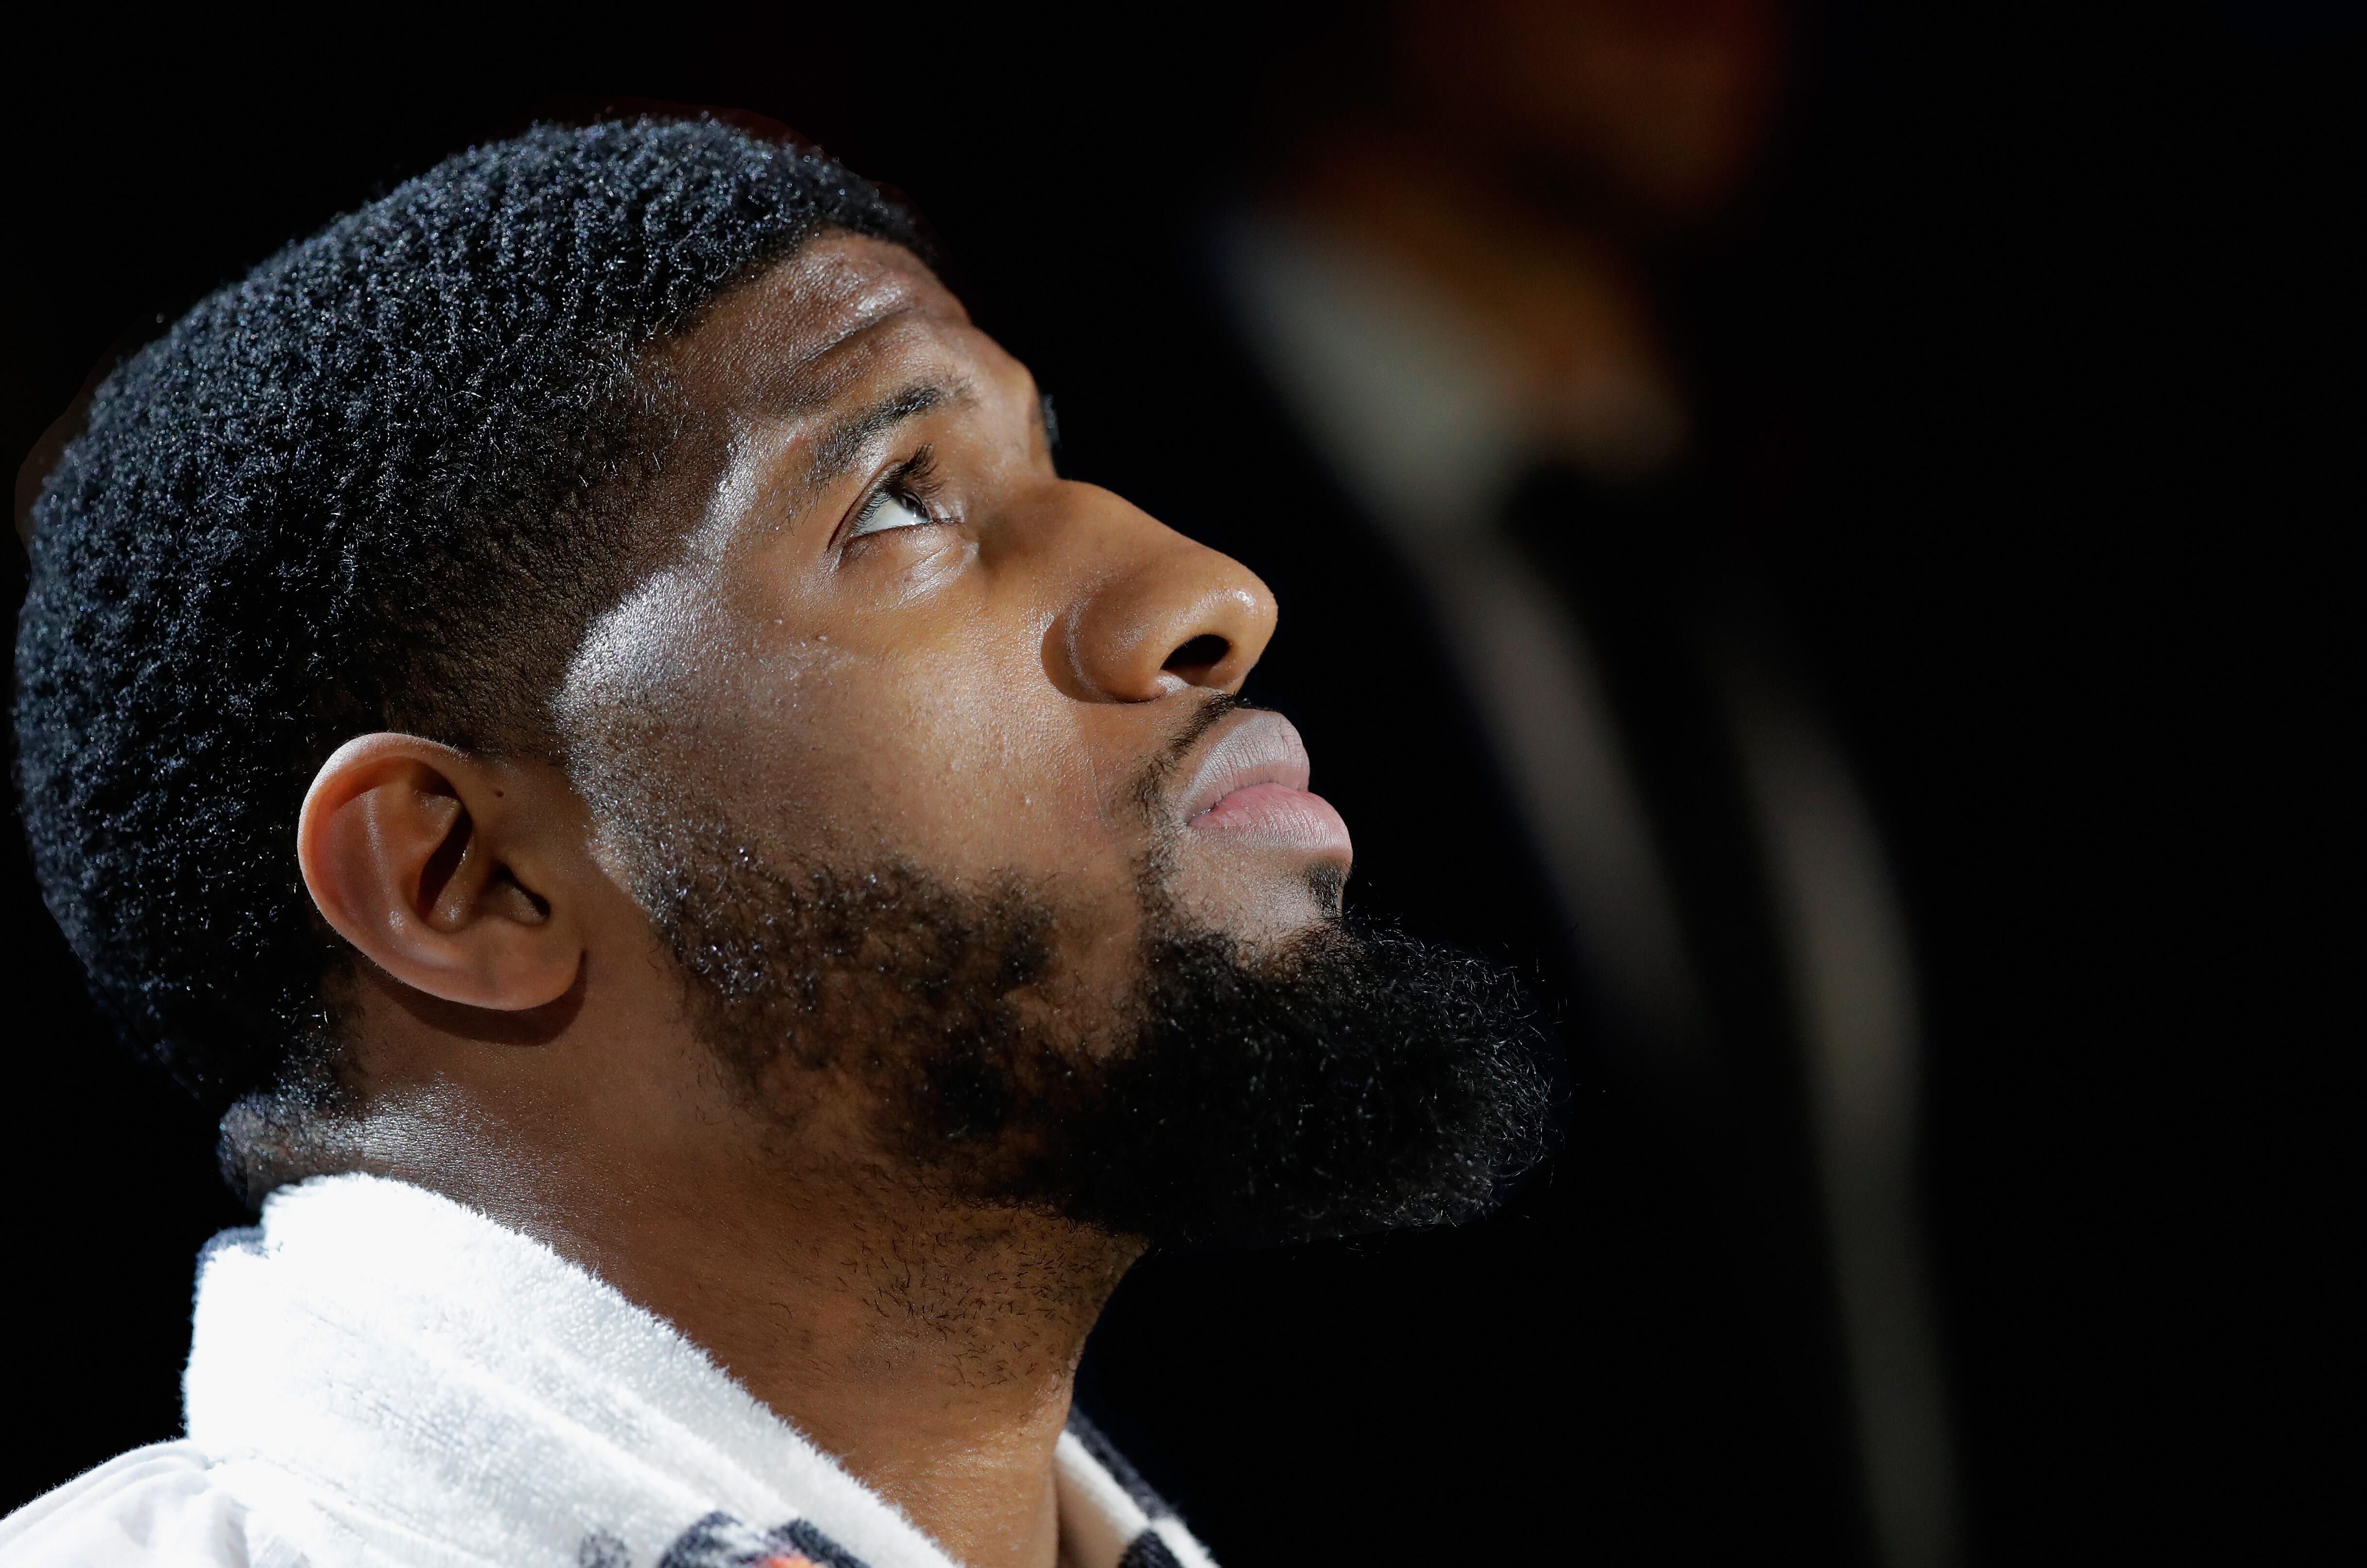 INDIANAPOLIS, IN - MARCH 28: Paul George #13 of the Indiana Pacers waits to be introduced before the game against the Minnesota Timberwolves at Bankers Life Fieldhouse on March 28, 2017 in Indianapolis, Indiana.  NOTE TO USER: User expressly acknowledges 